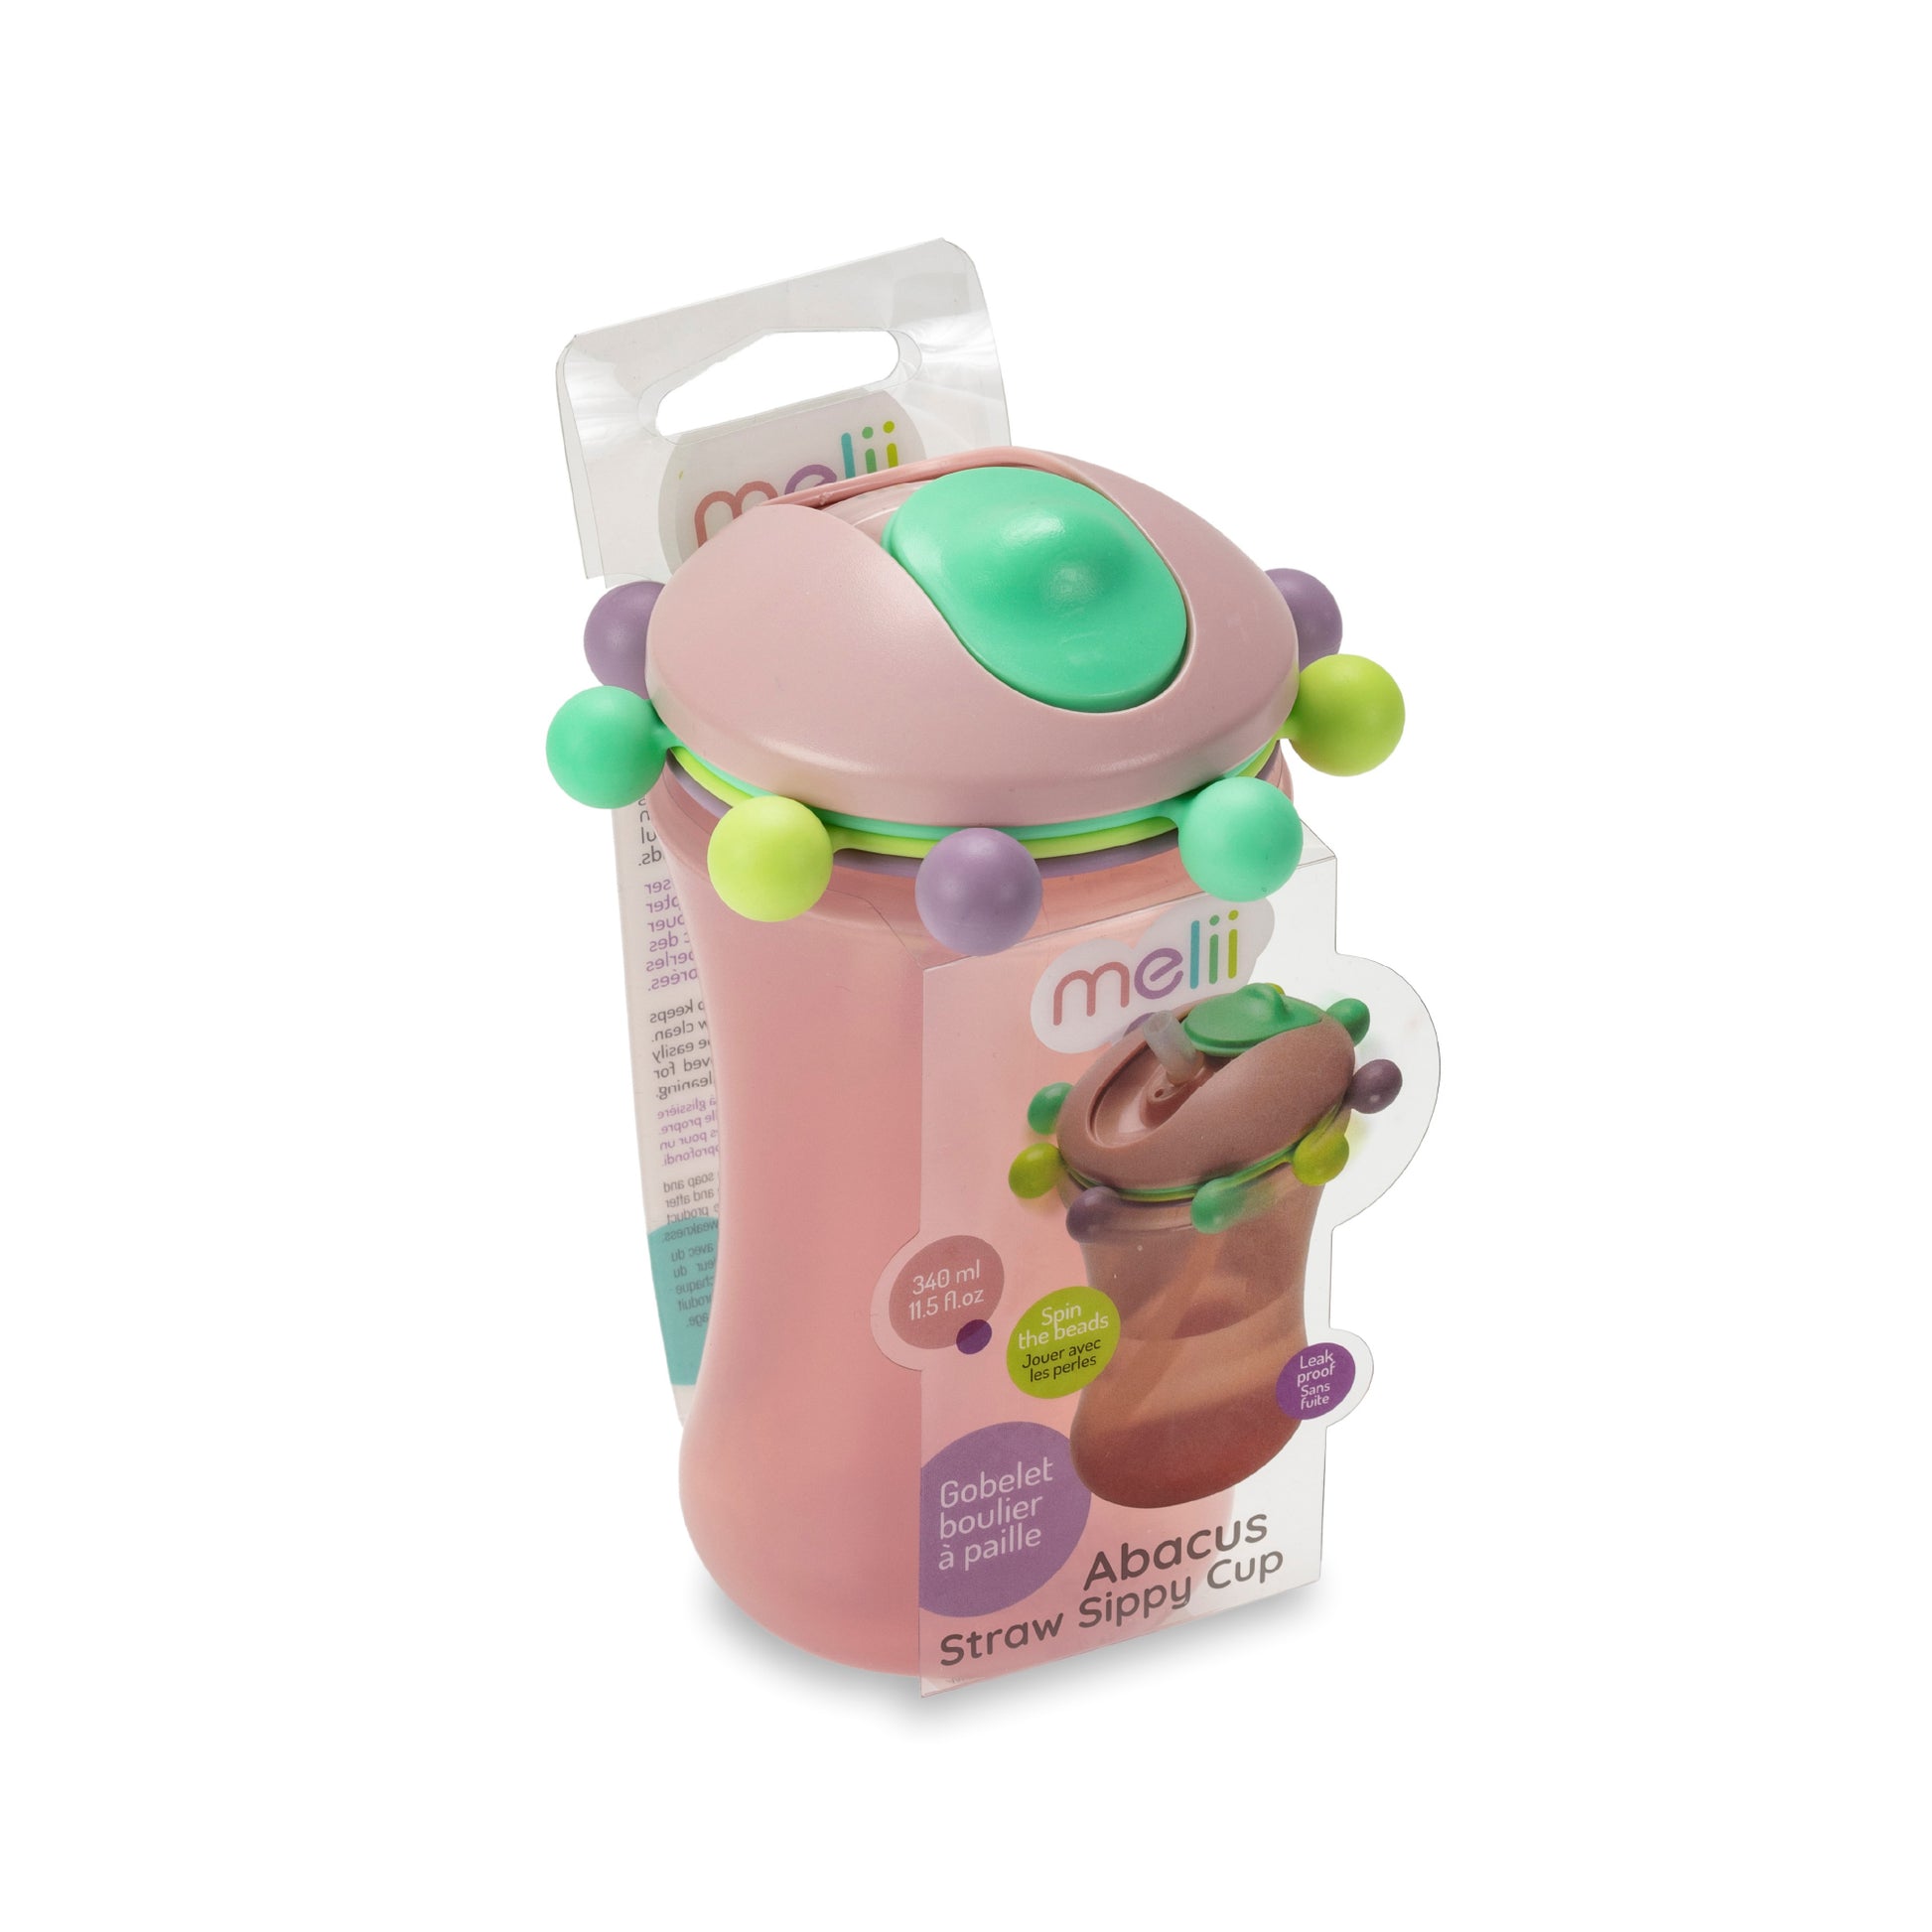 Melii Spin Sippy Cup Pink - Fun & Educational Transition Straw Bottle for Babies, Toddlers, Kids - Spill Proof, Easy to Hold, BPA-Free,  Ideal for On-the-Go Hydration